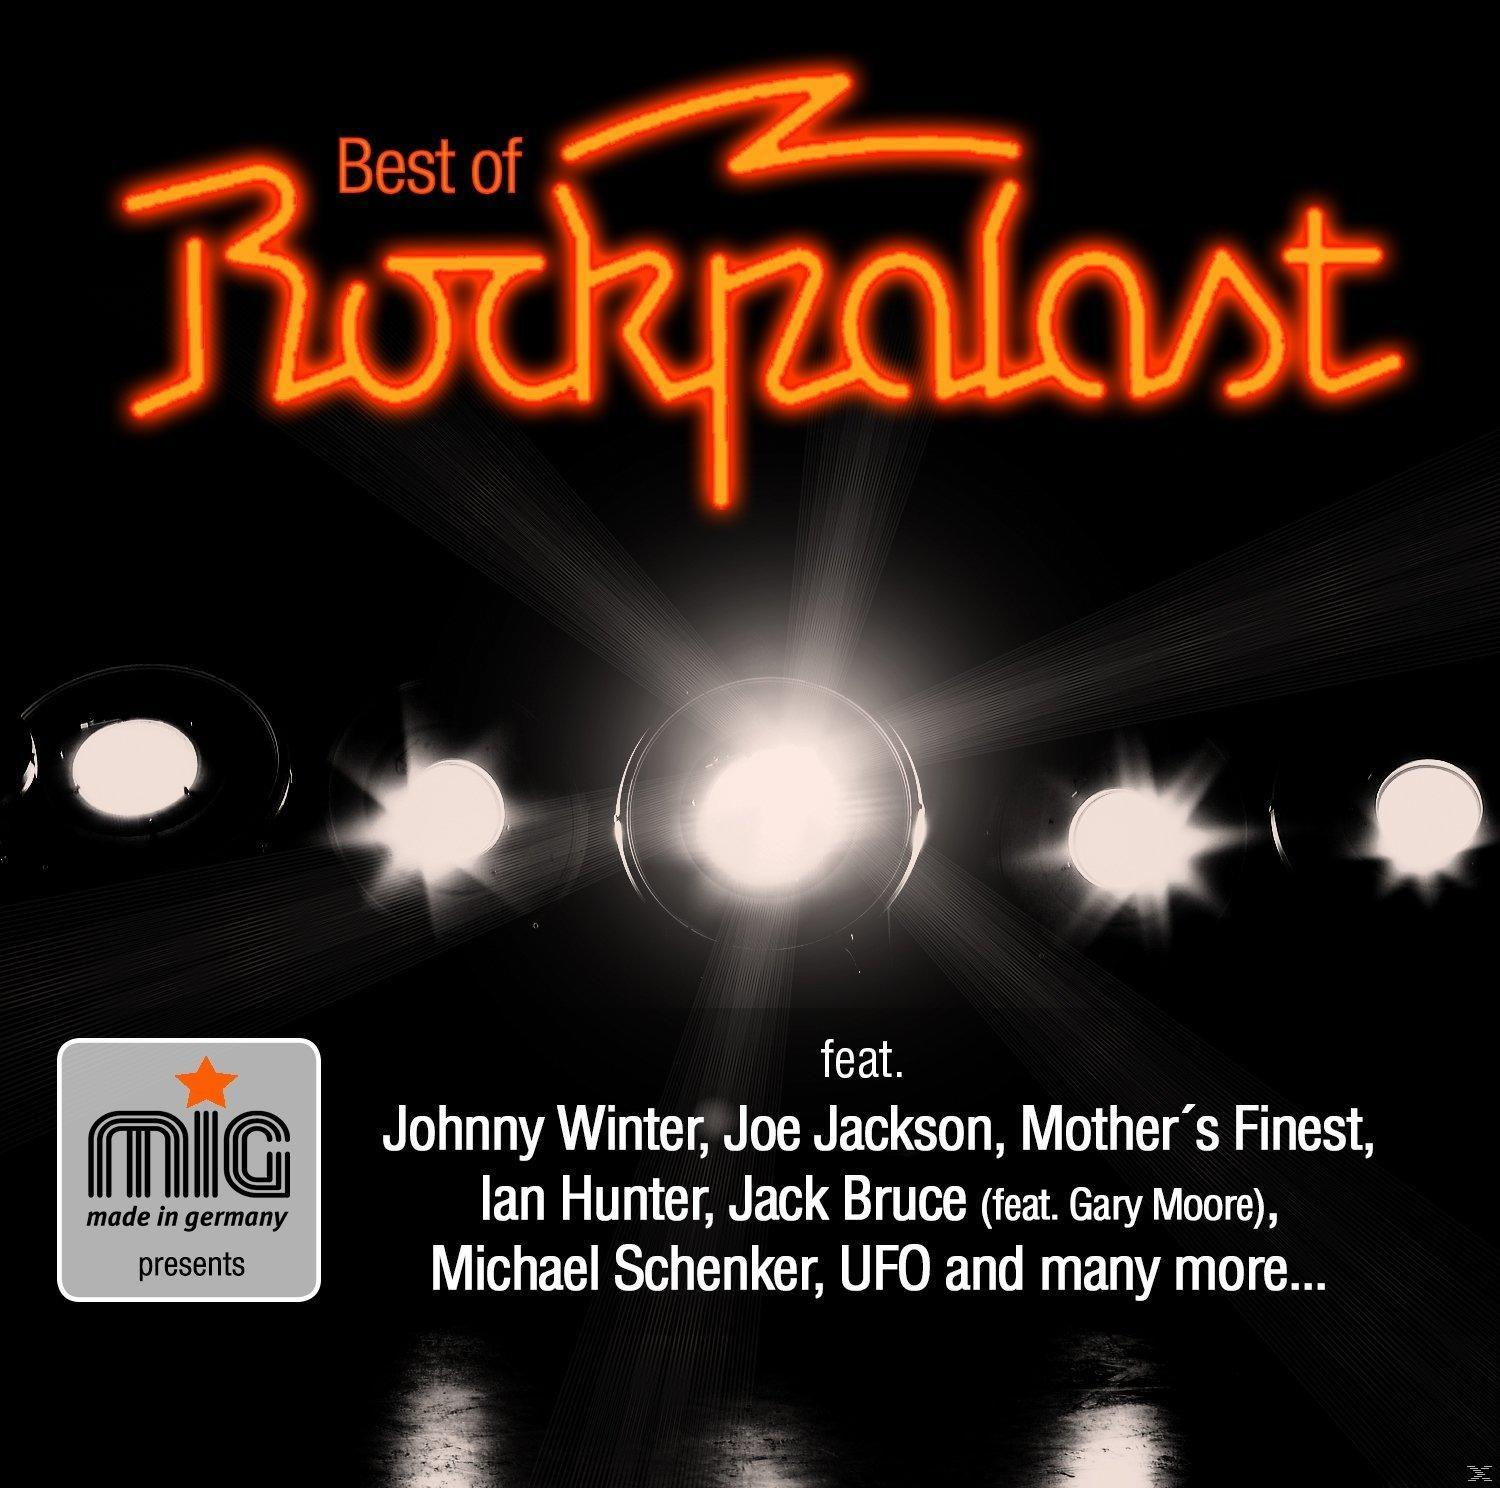 VARIOUS - Best Of (CD) - Rockpalast